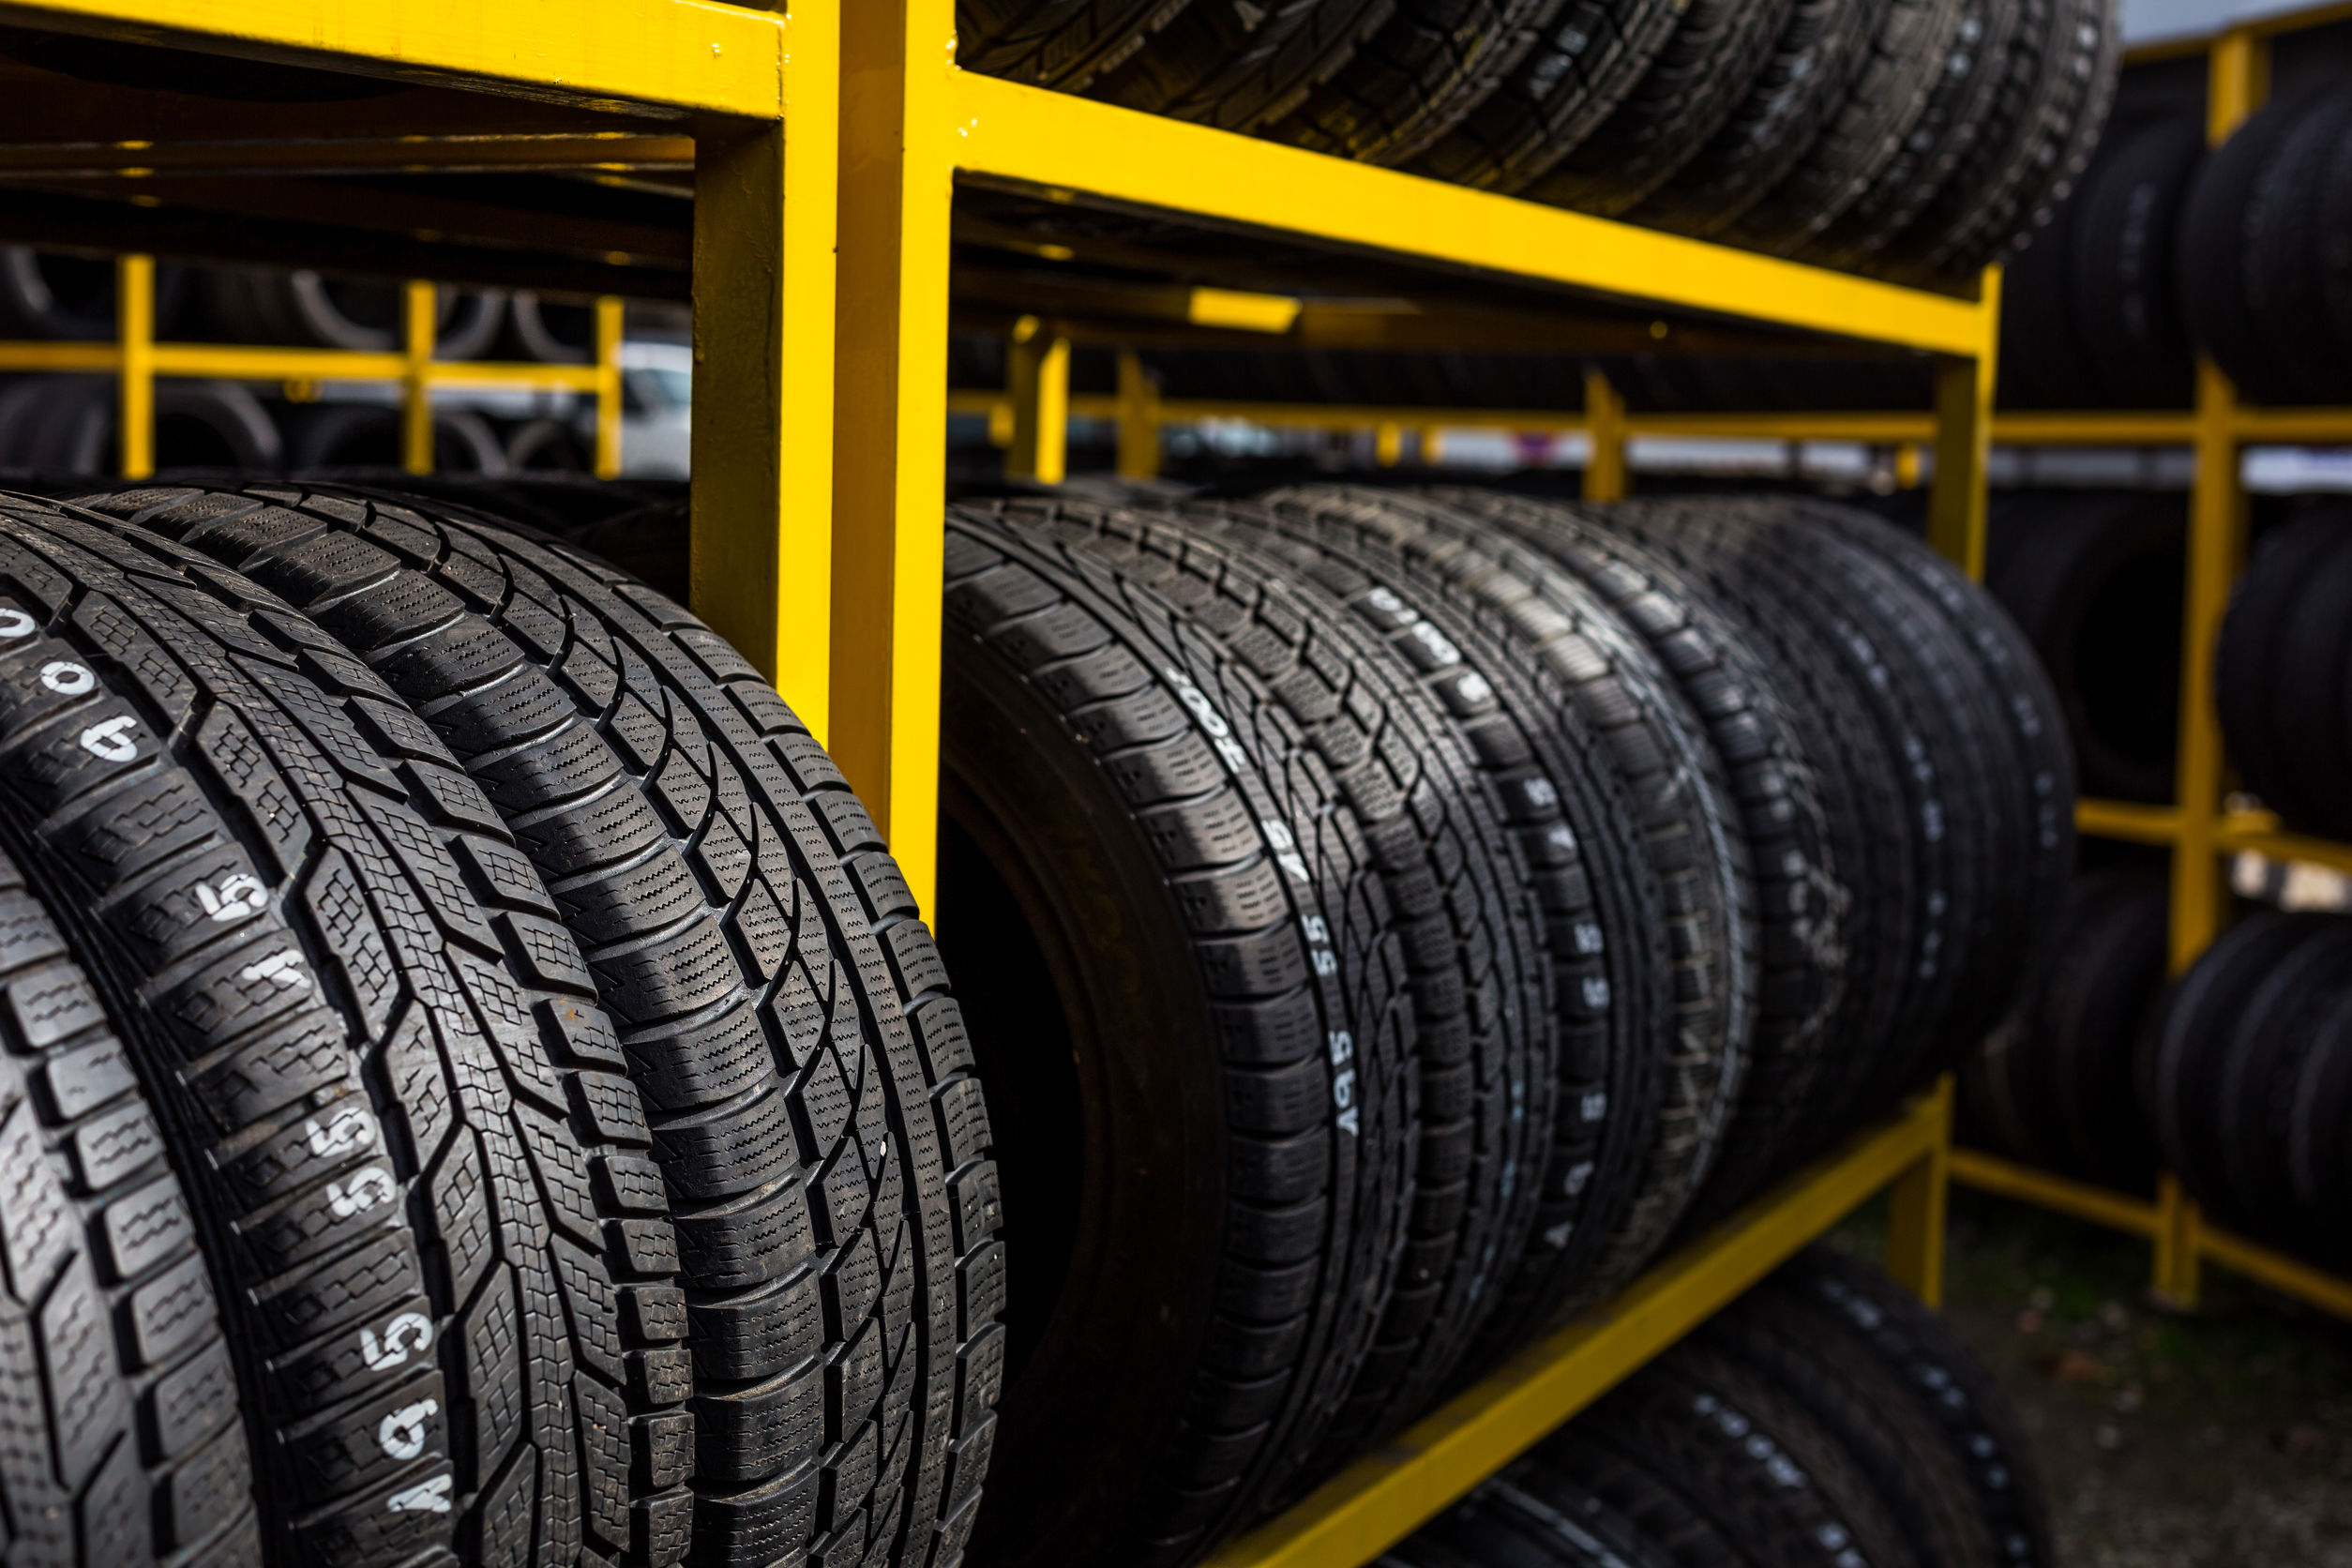 45397355 - tires for sale at a tire store